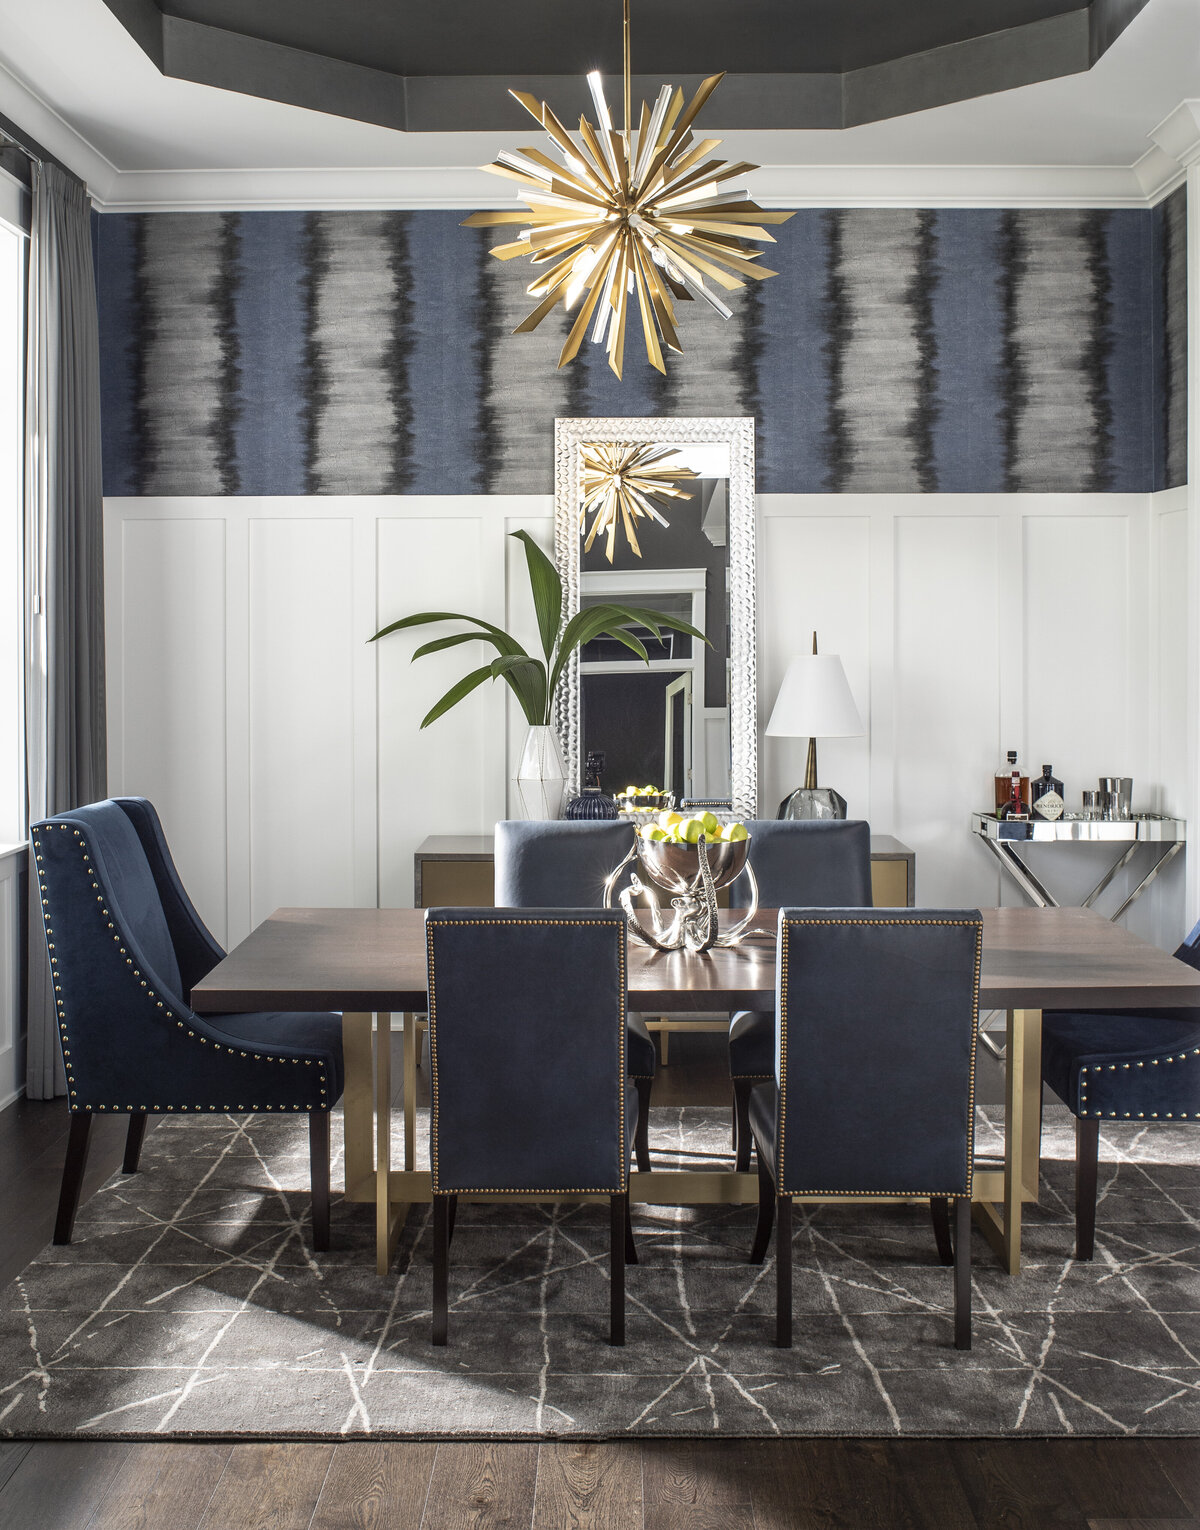 Aesthetic Dining Table with Blue Comfy Chairs